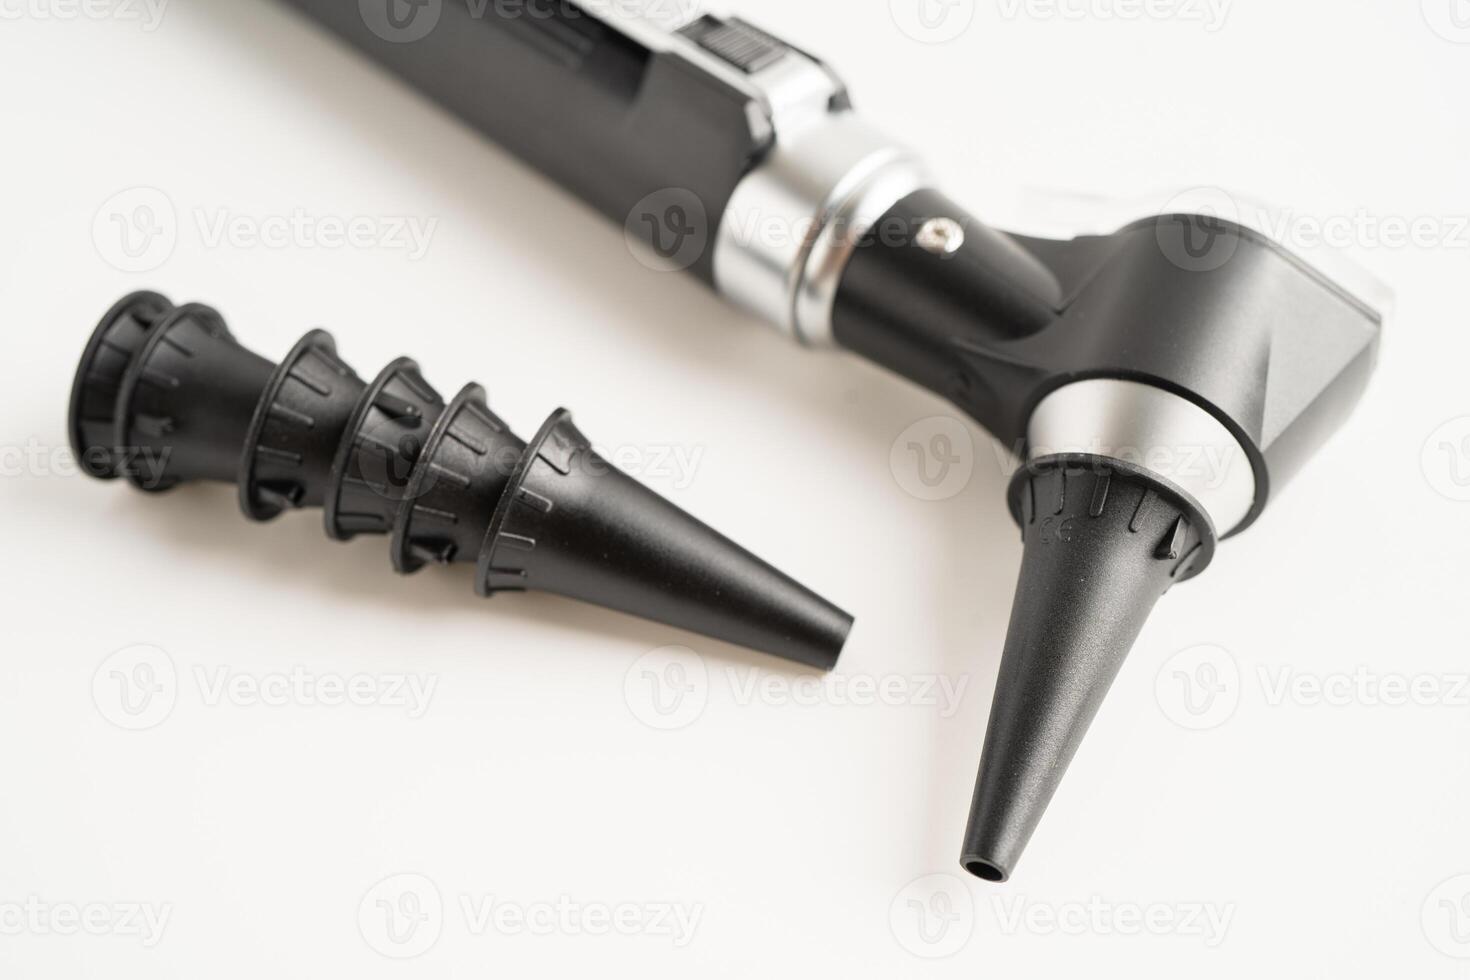 Otoscope for audiologist or ENT doctor use otoscope checking ear and treate hearing loss problem. photo